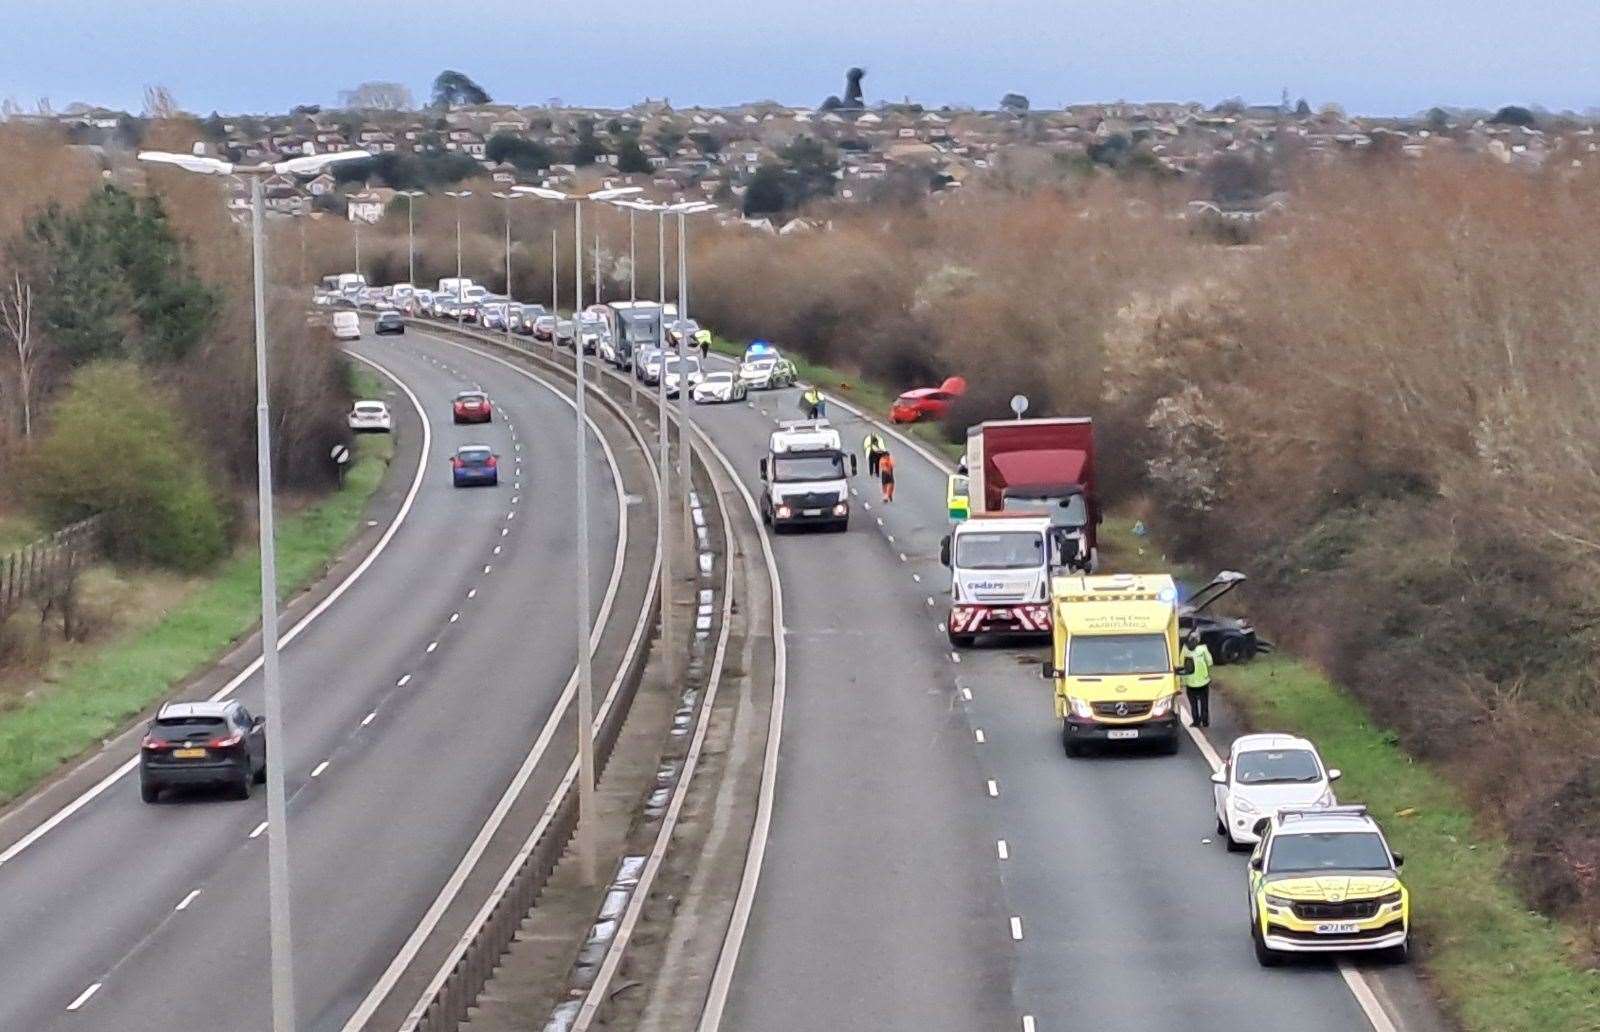 The crash occurred on the A299 Thanet Way near Herne Bay